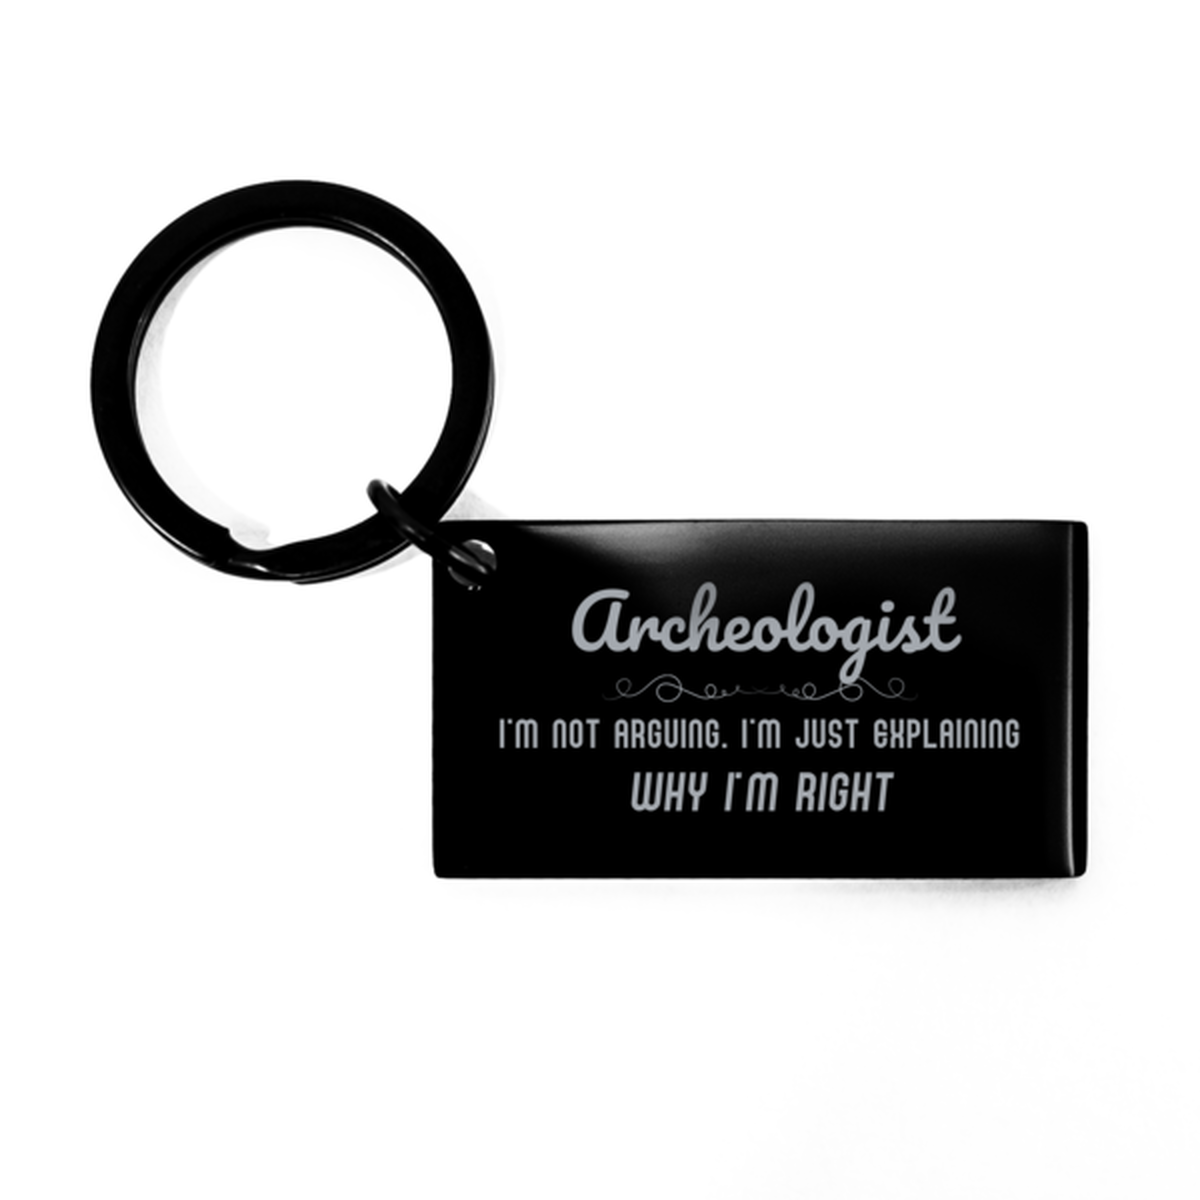 Archeologist I'm not Arguing. I'm Just Explaining Why I'm RIGHT Keychain, Funny Saying Quote Archeologist Gifts For Archeologist Graduation Birthday Christmas Gifts for Men Women Coworker